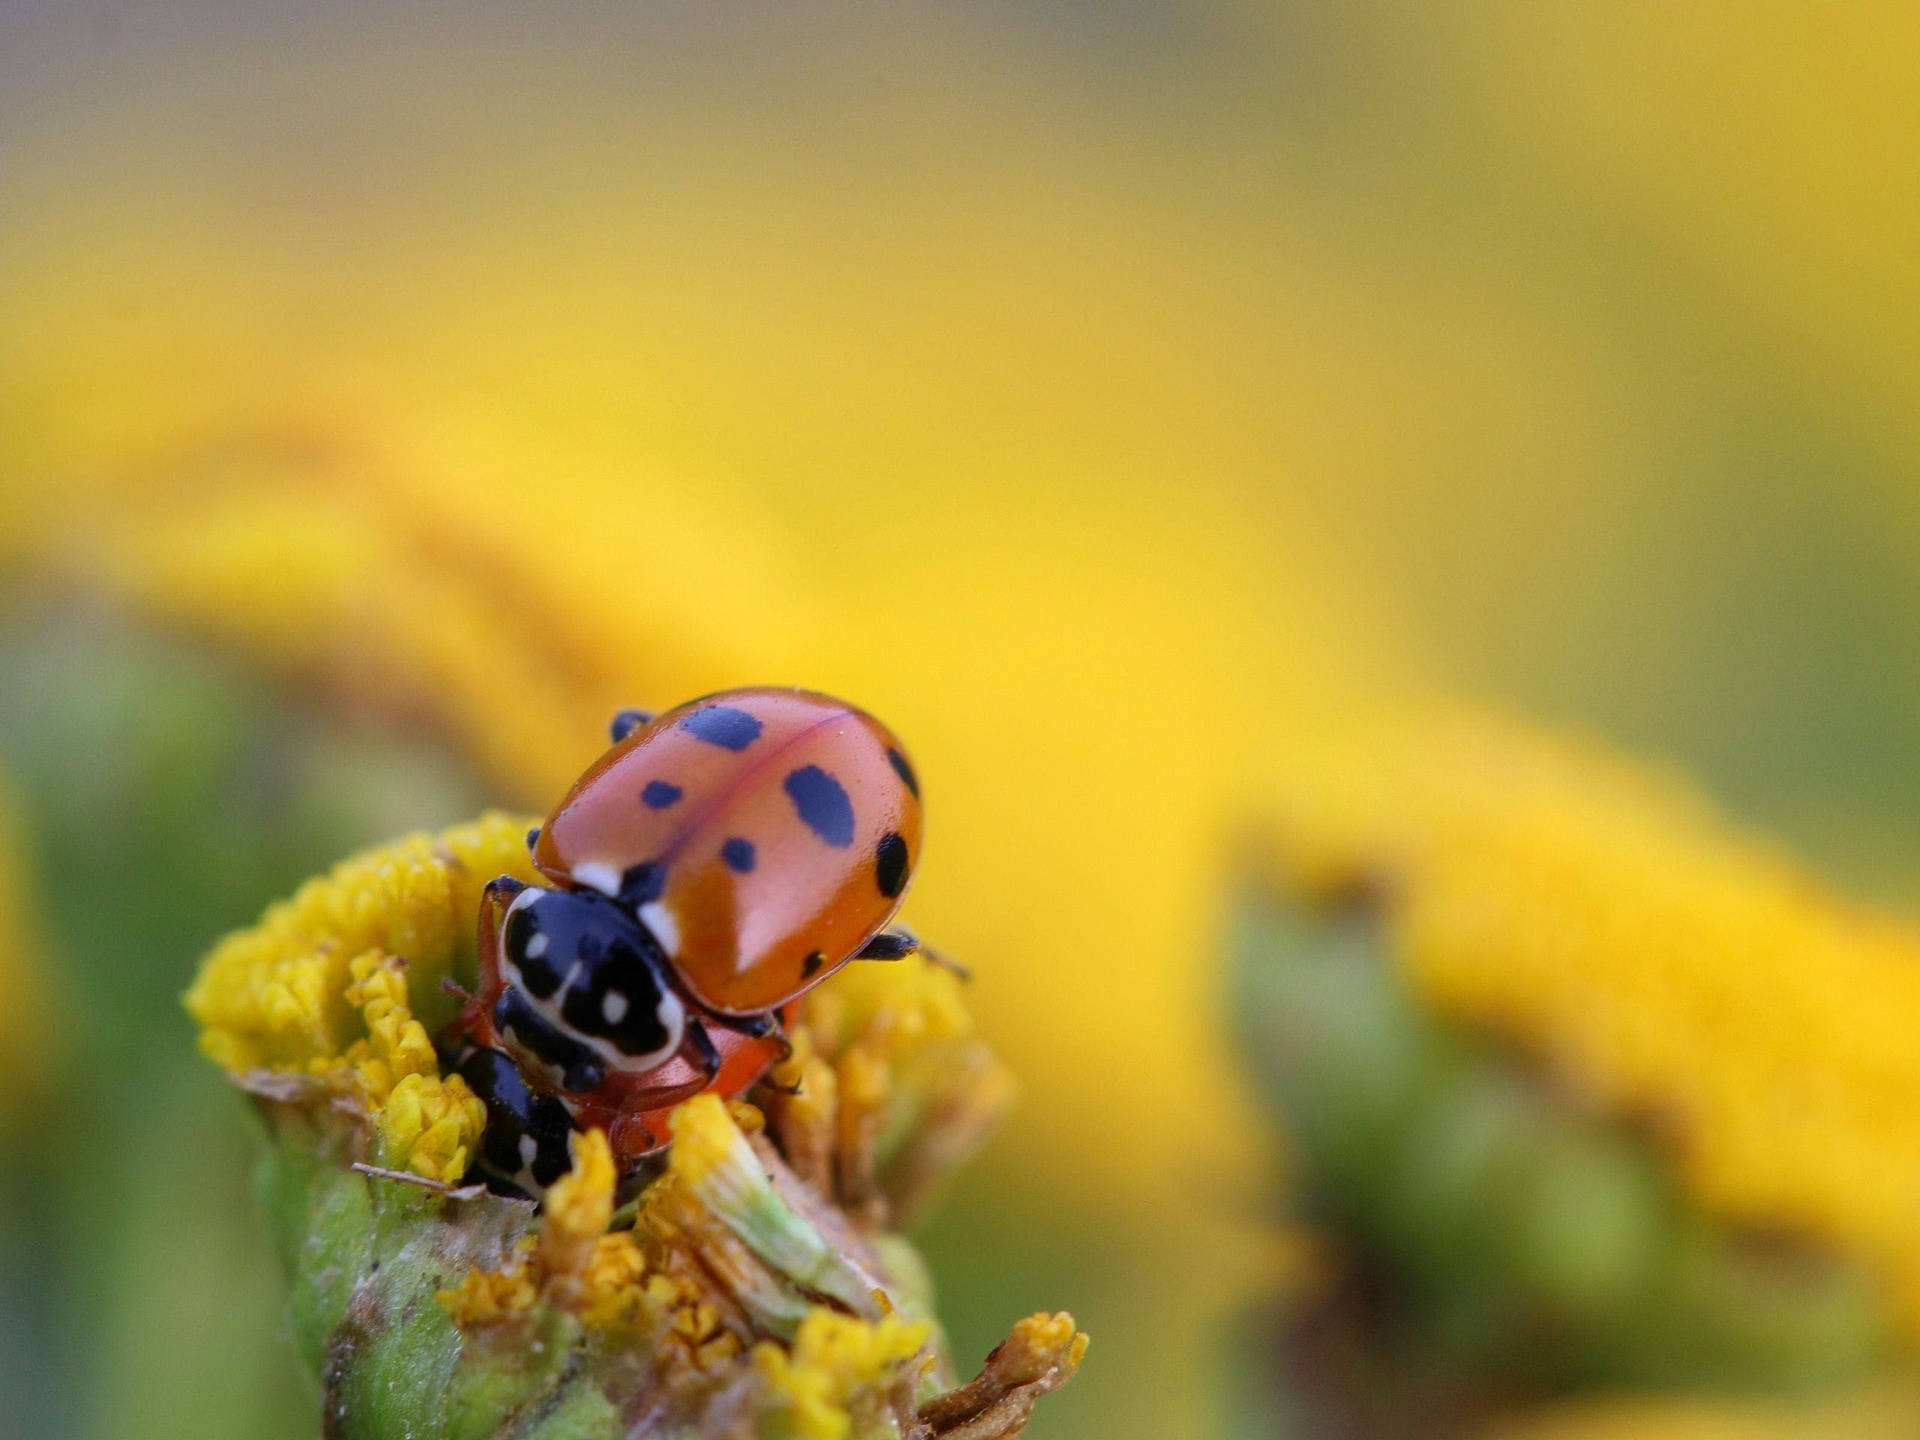 Insect Ladybug On Yellow Flower Wallpaper